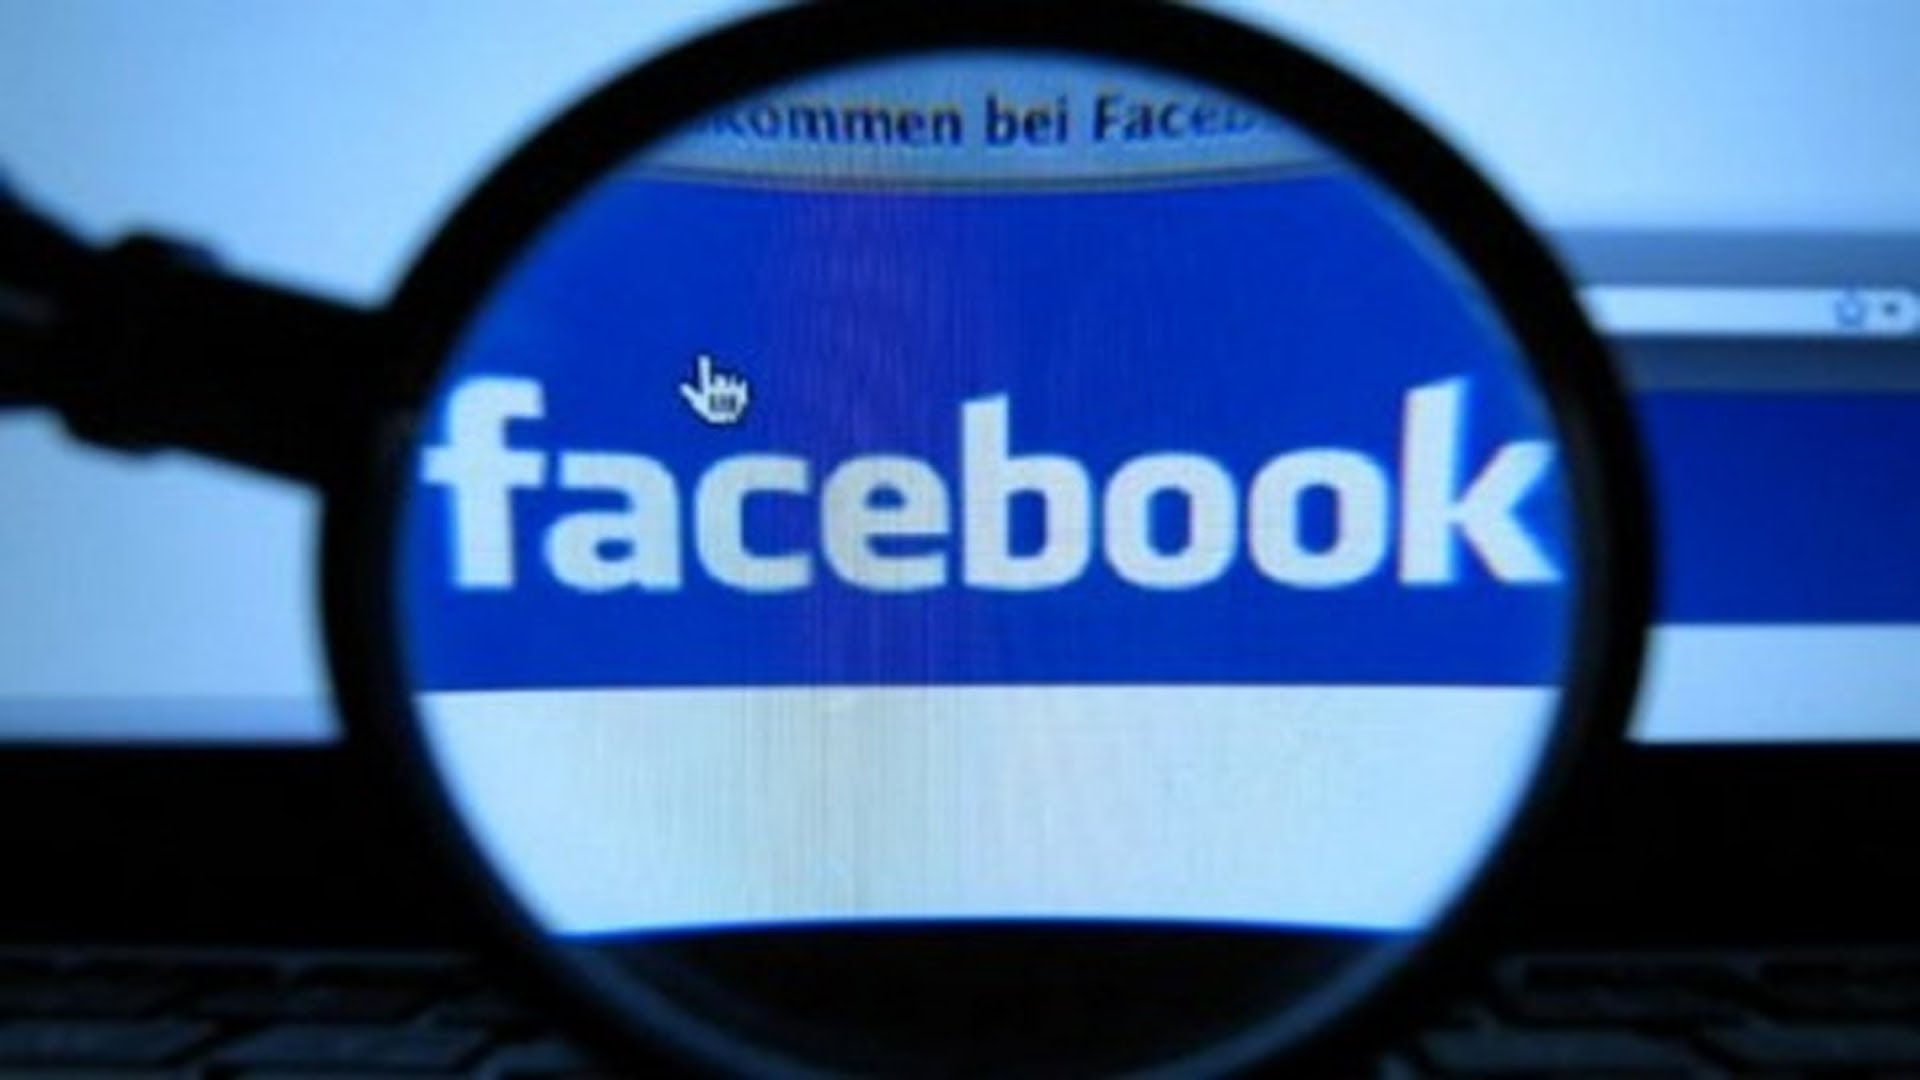 Facebook To Use Web Browsing History For Ad Targeting